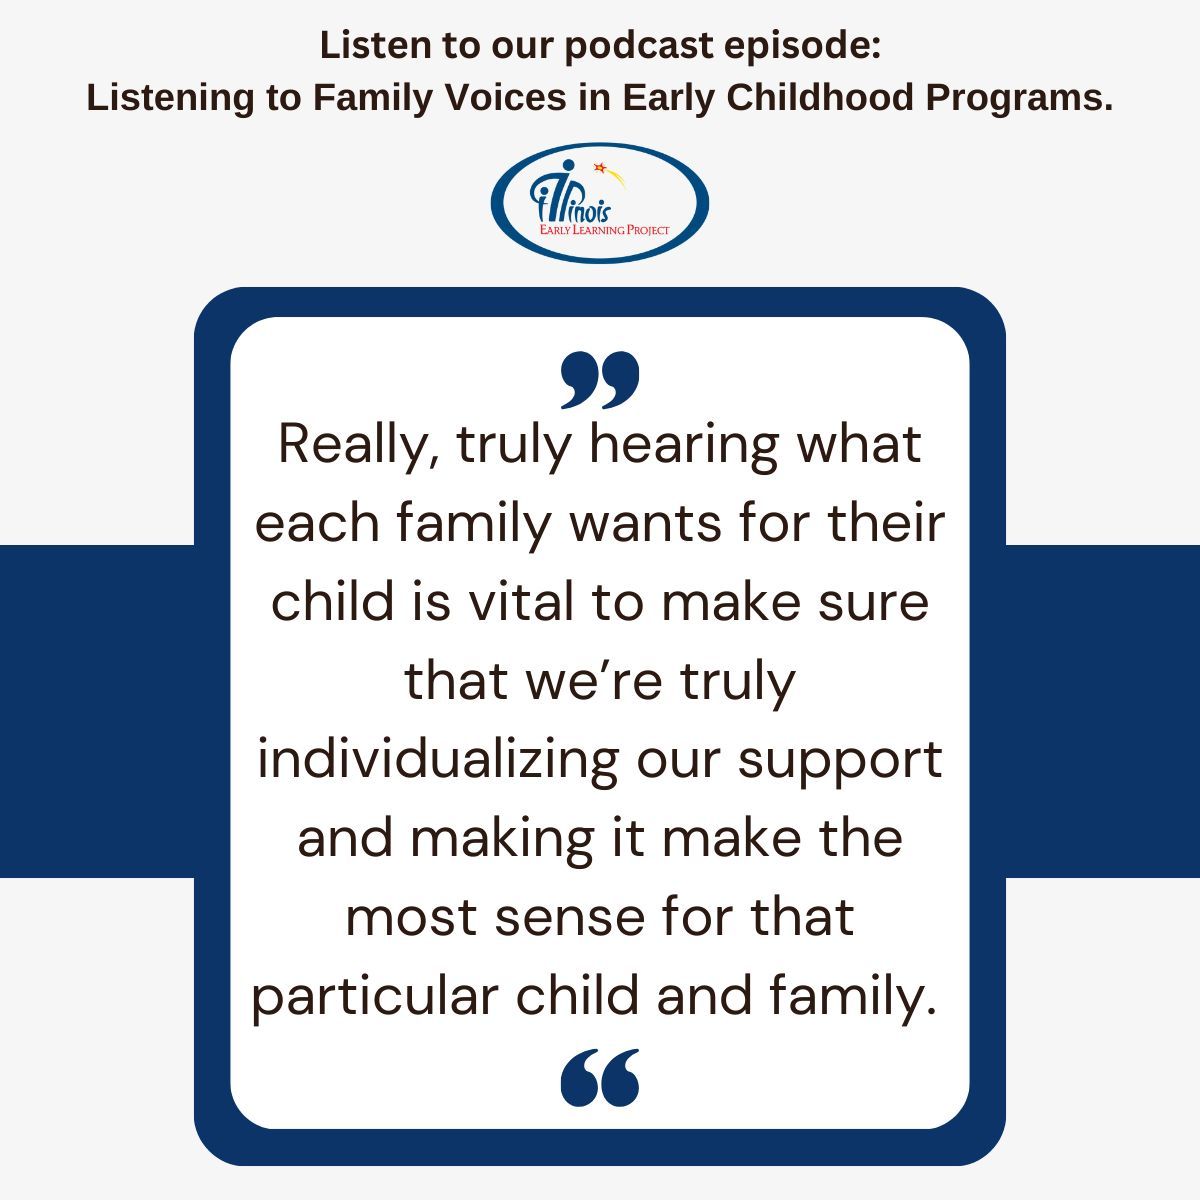 Listen 🎧 to our podcast episode: Listening to Family Voices in Early Childhood Programs.
#Podcast #IllinoisEarlyLearning
illinoisearlylearning.org/podcasts/liste…